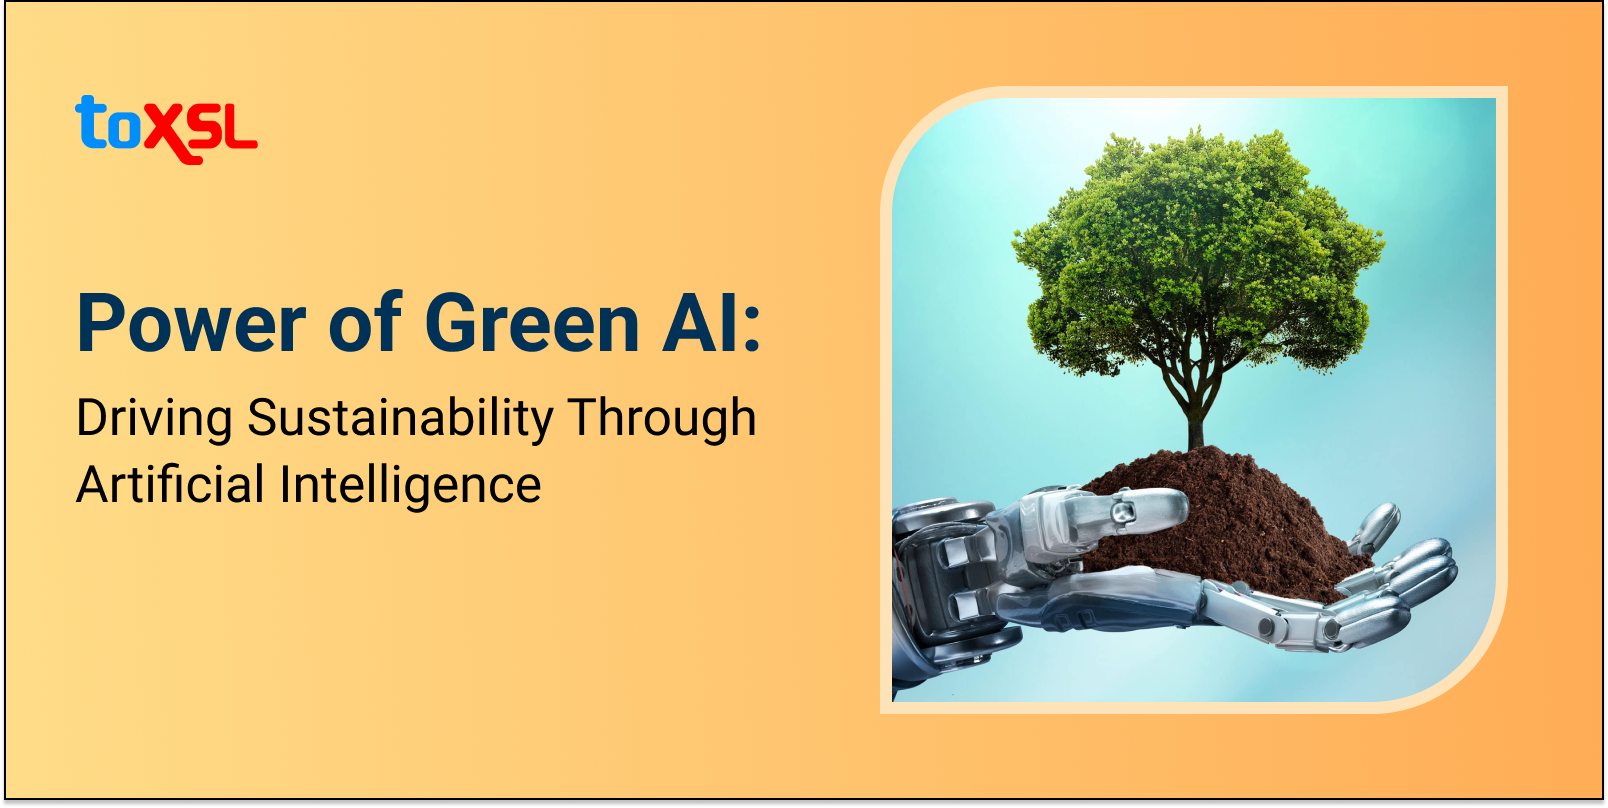 Power of Green AI: Driving Sustainability Through Artificial Intelligence